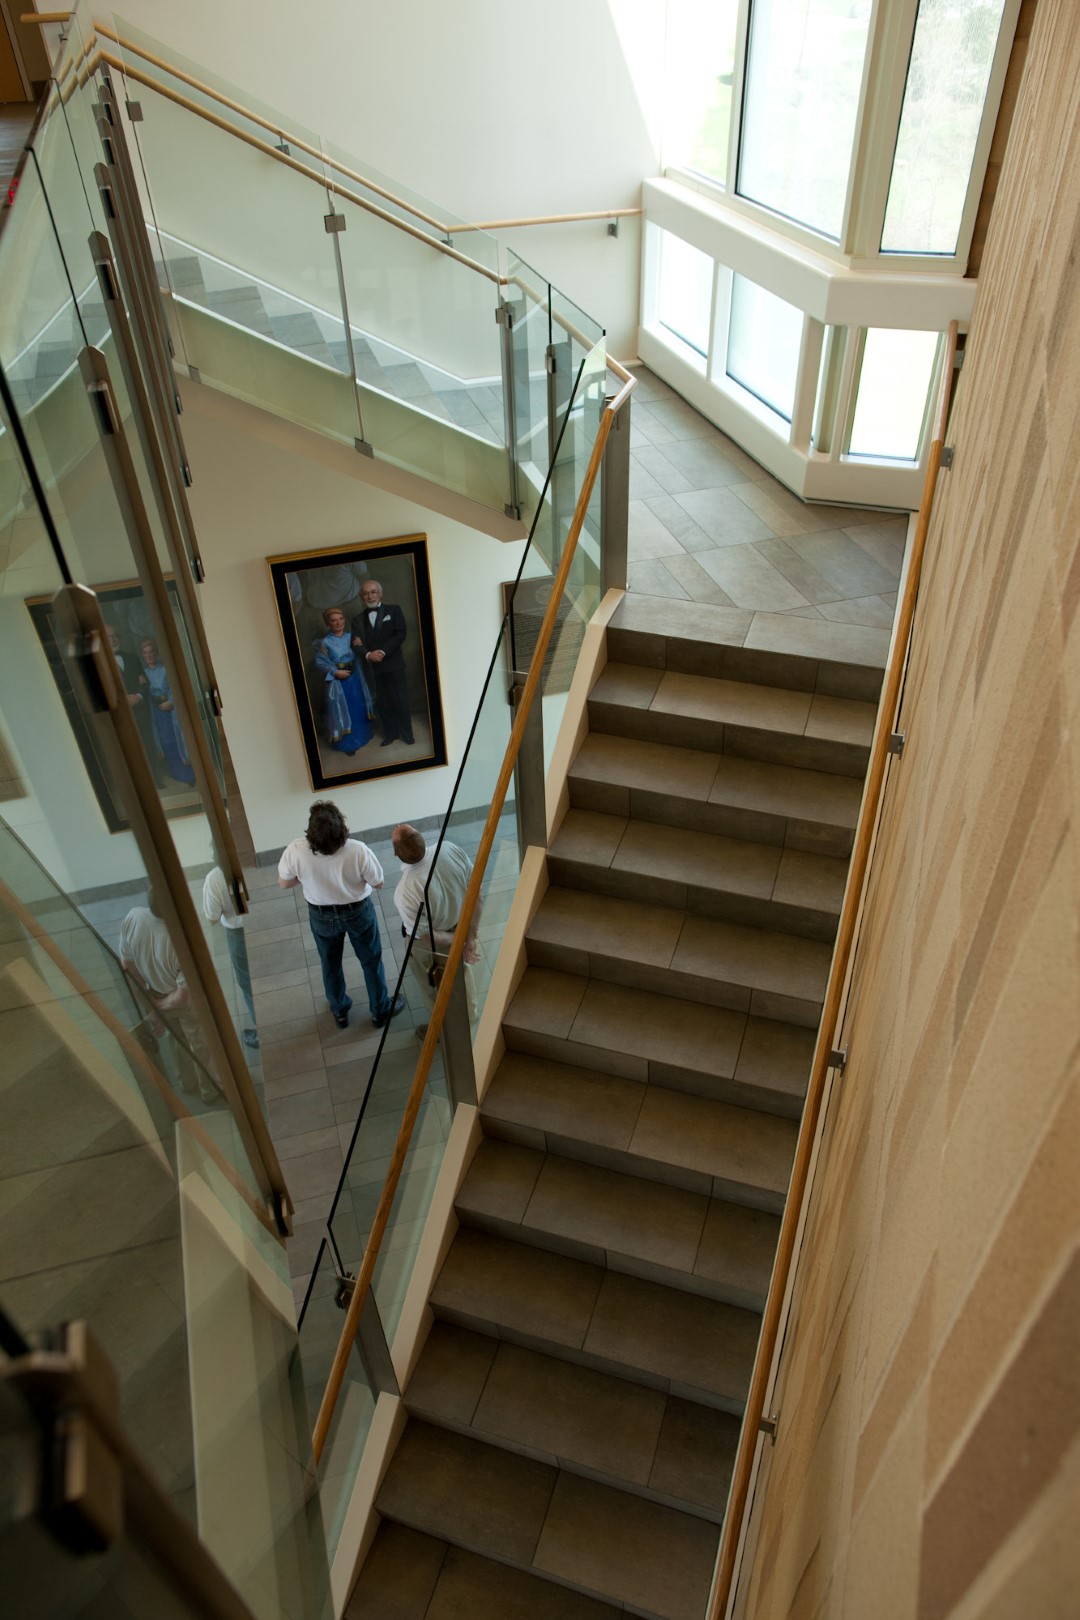 Walter Hall, Monumental staircase